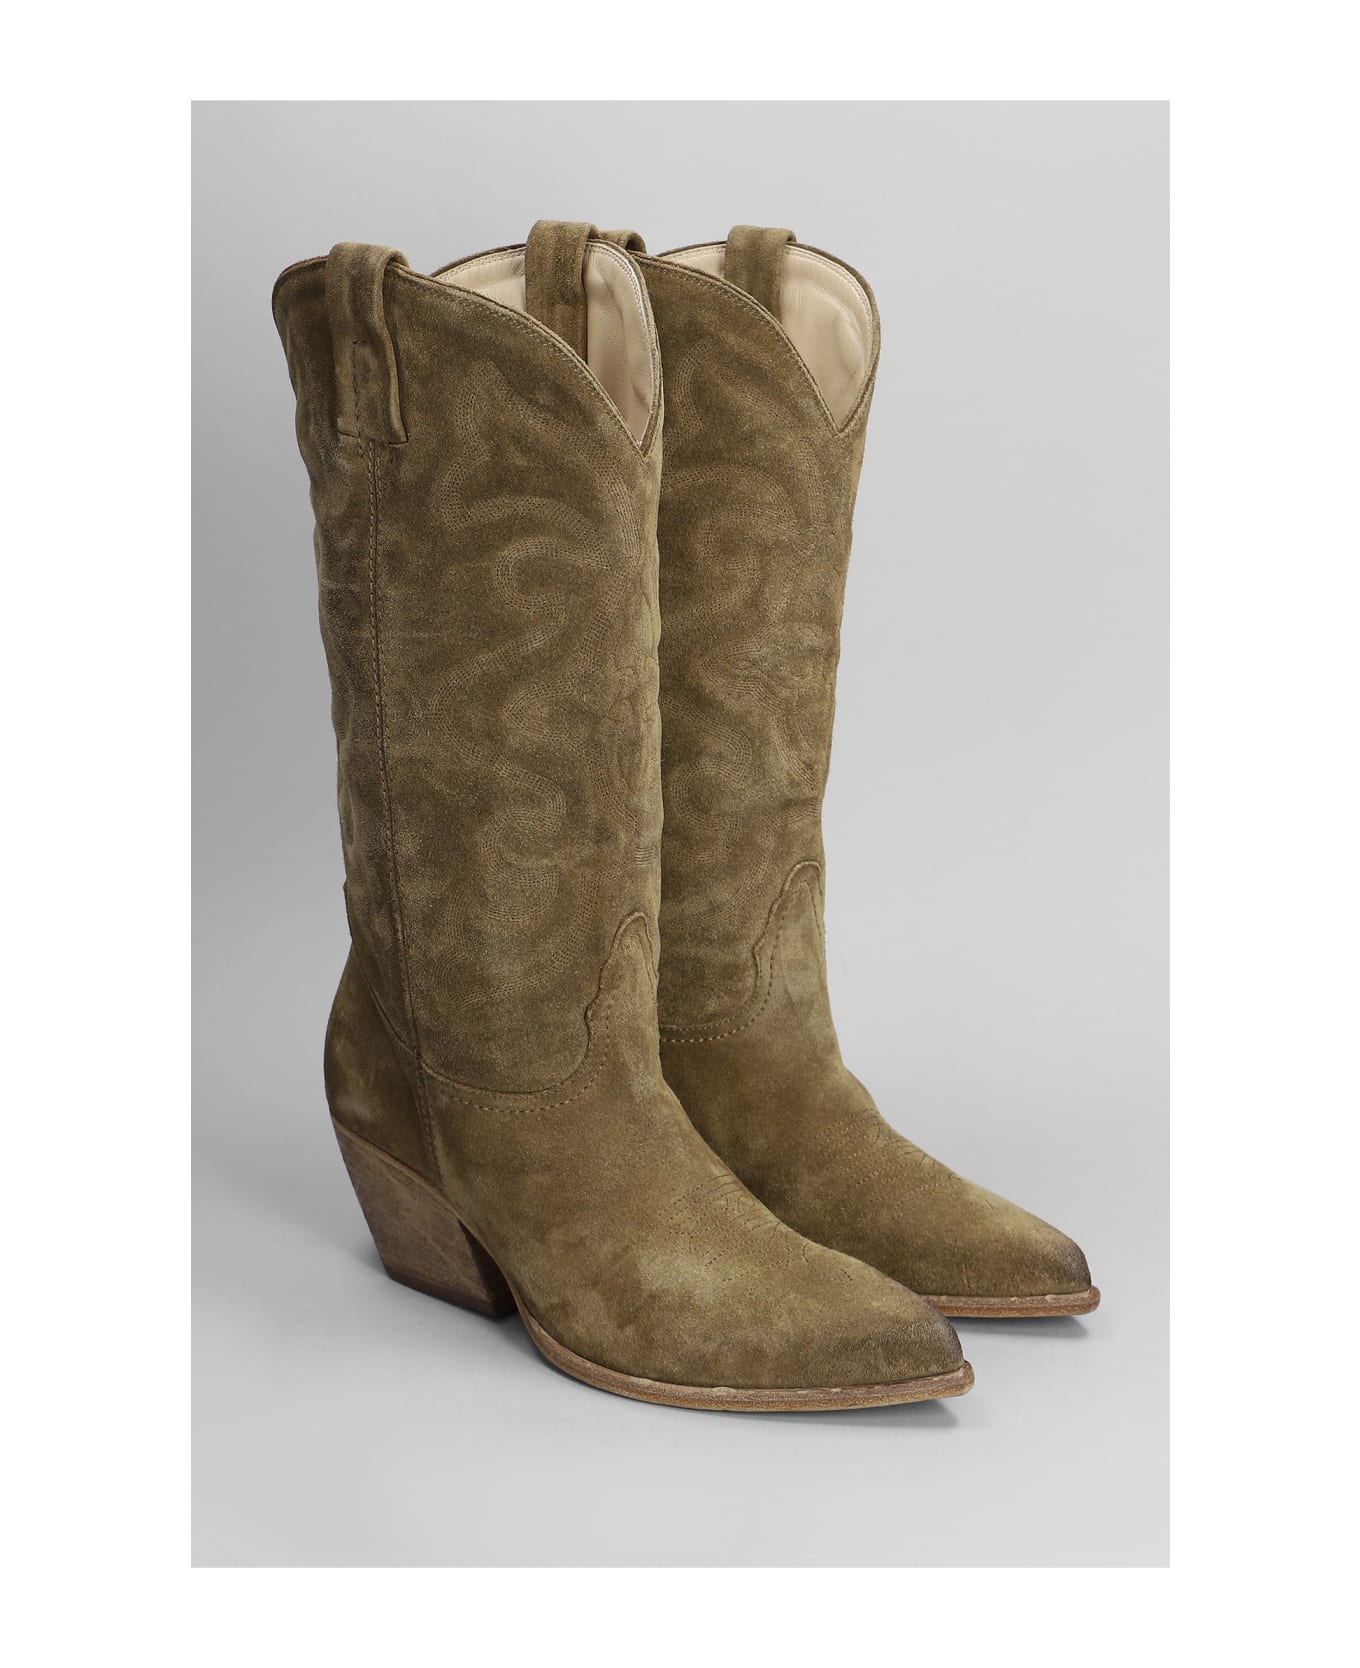 Elena Iachi Texan Boots In Taupe Suede - taupe ブーツ